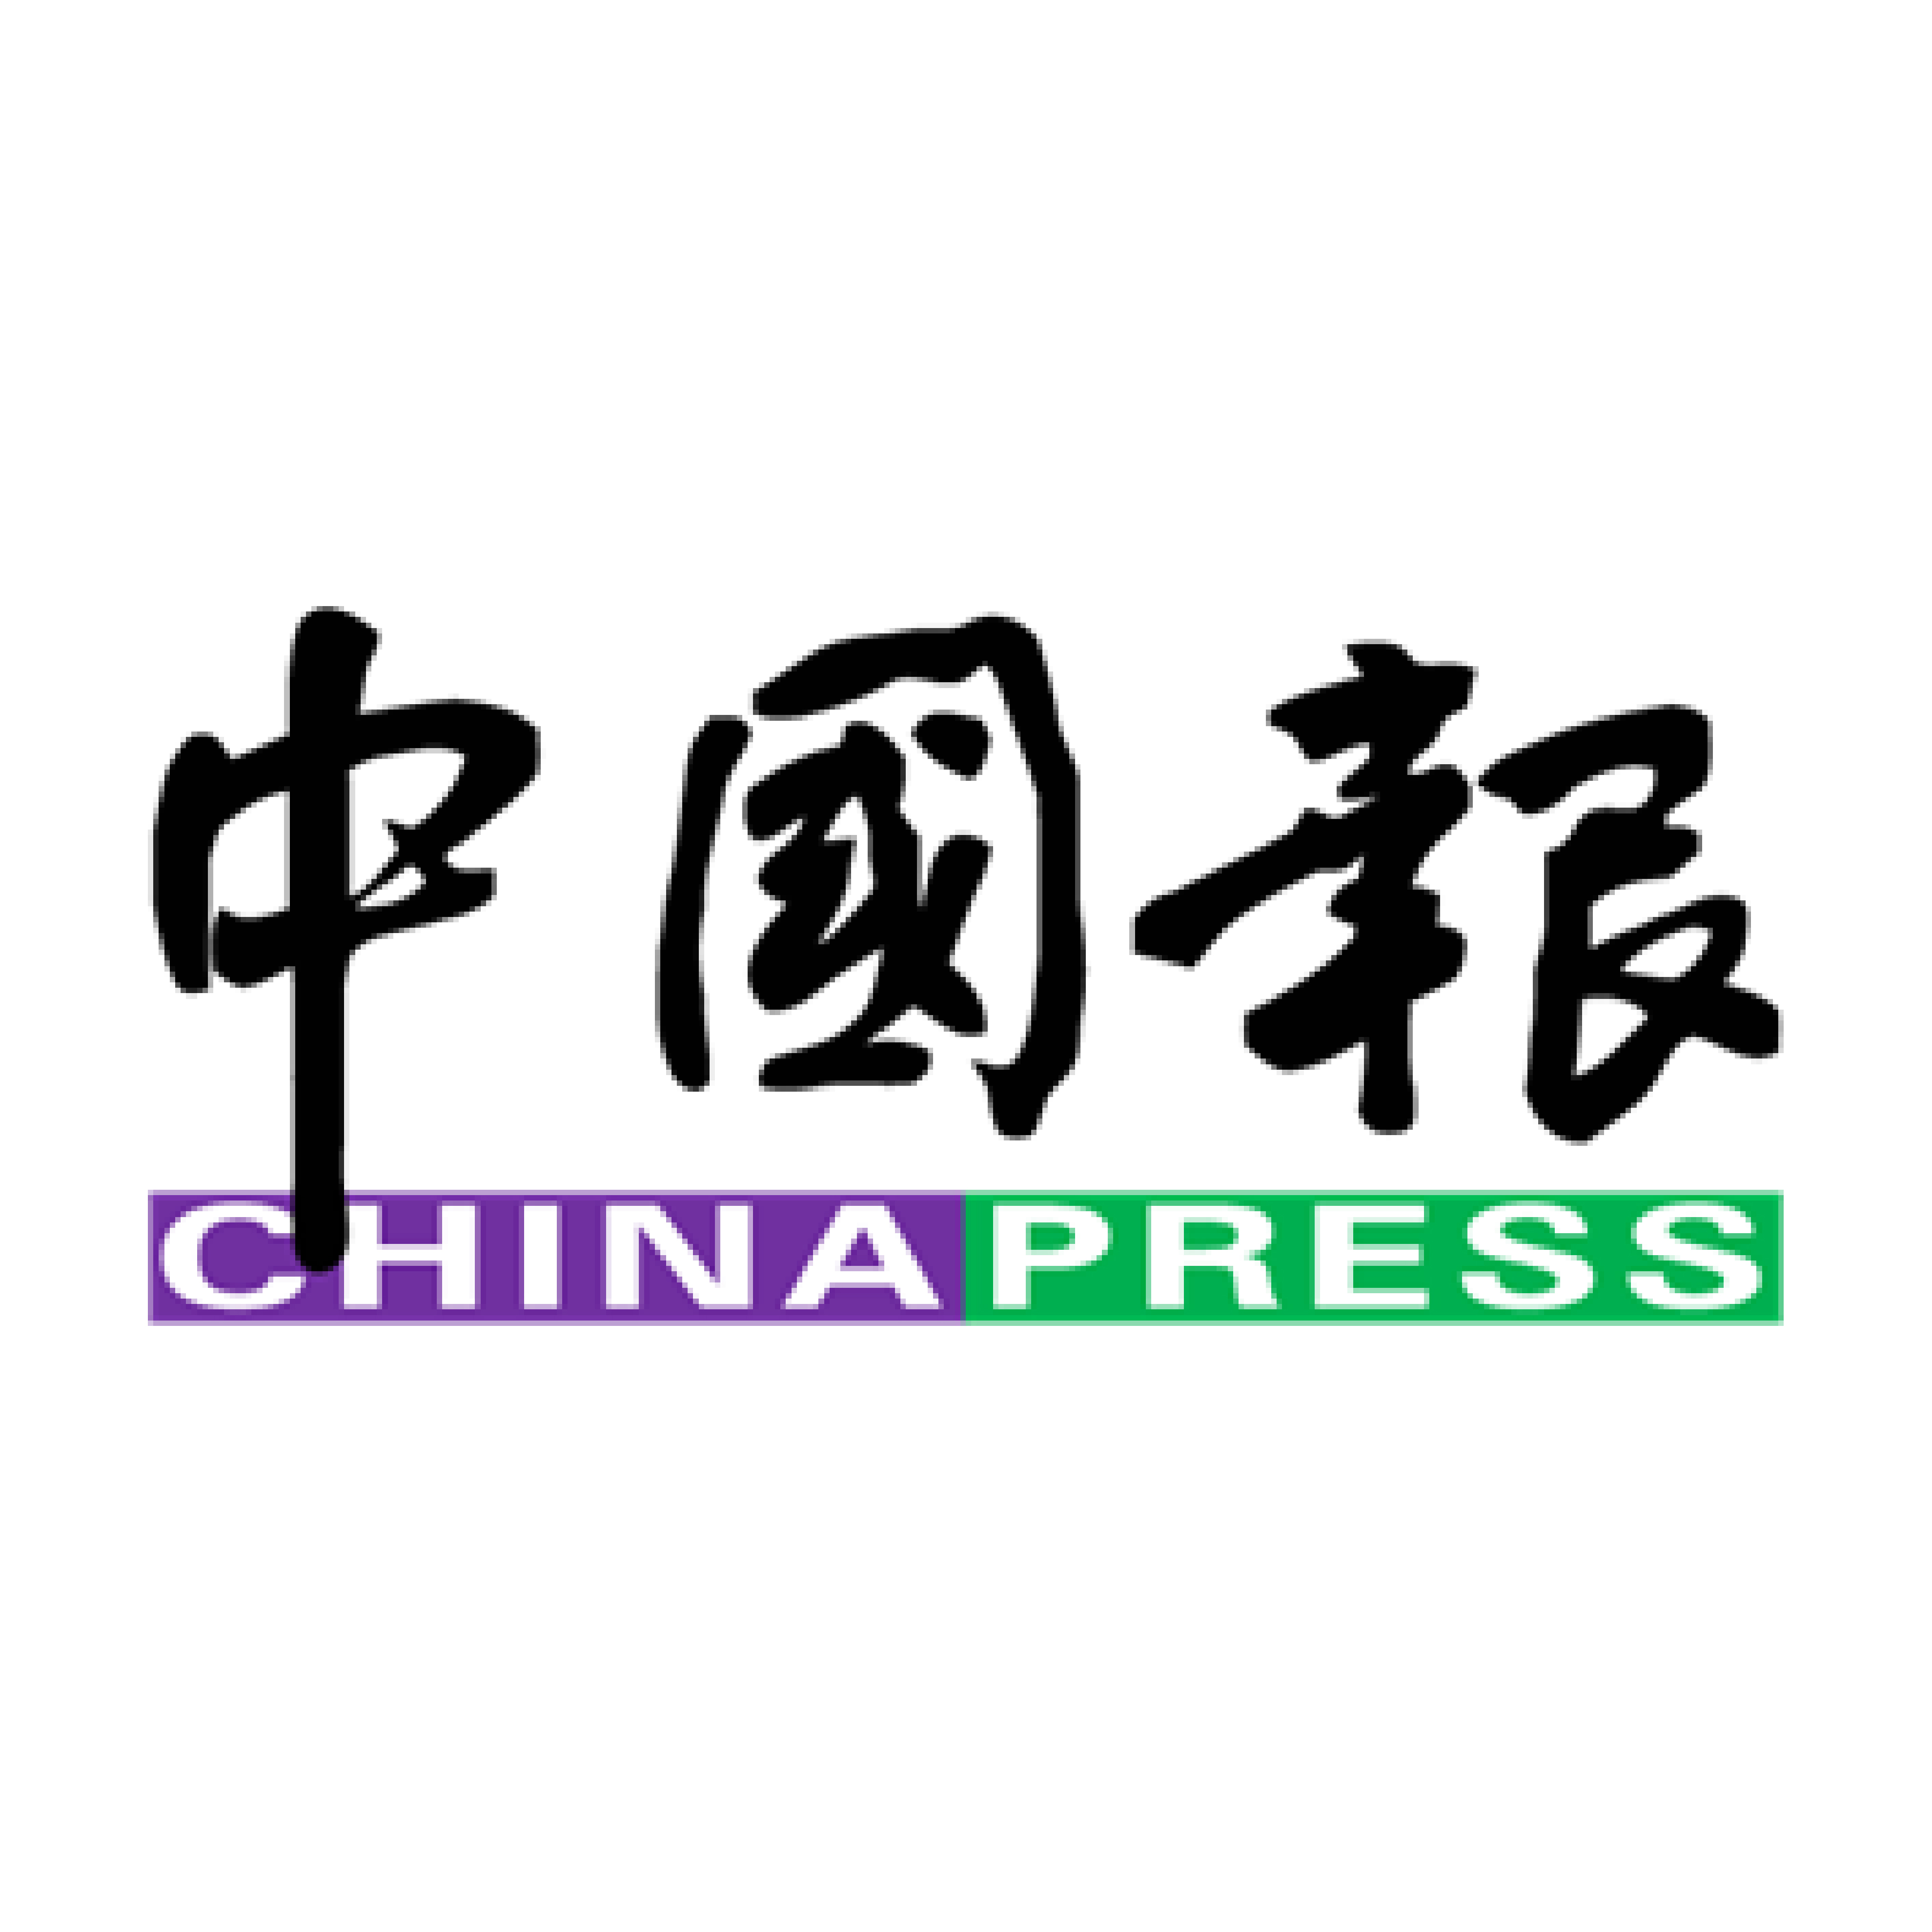 Featured in China Press